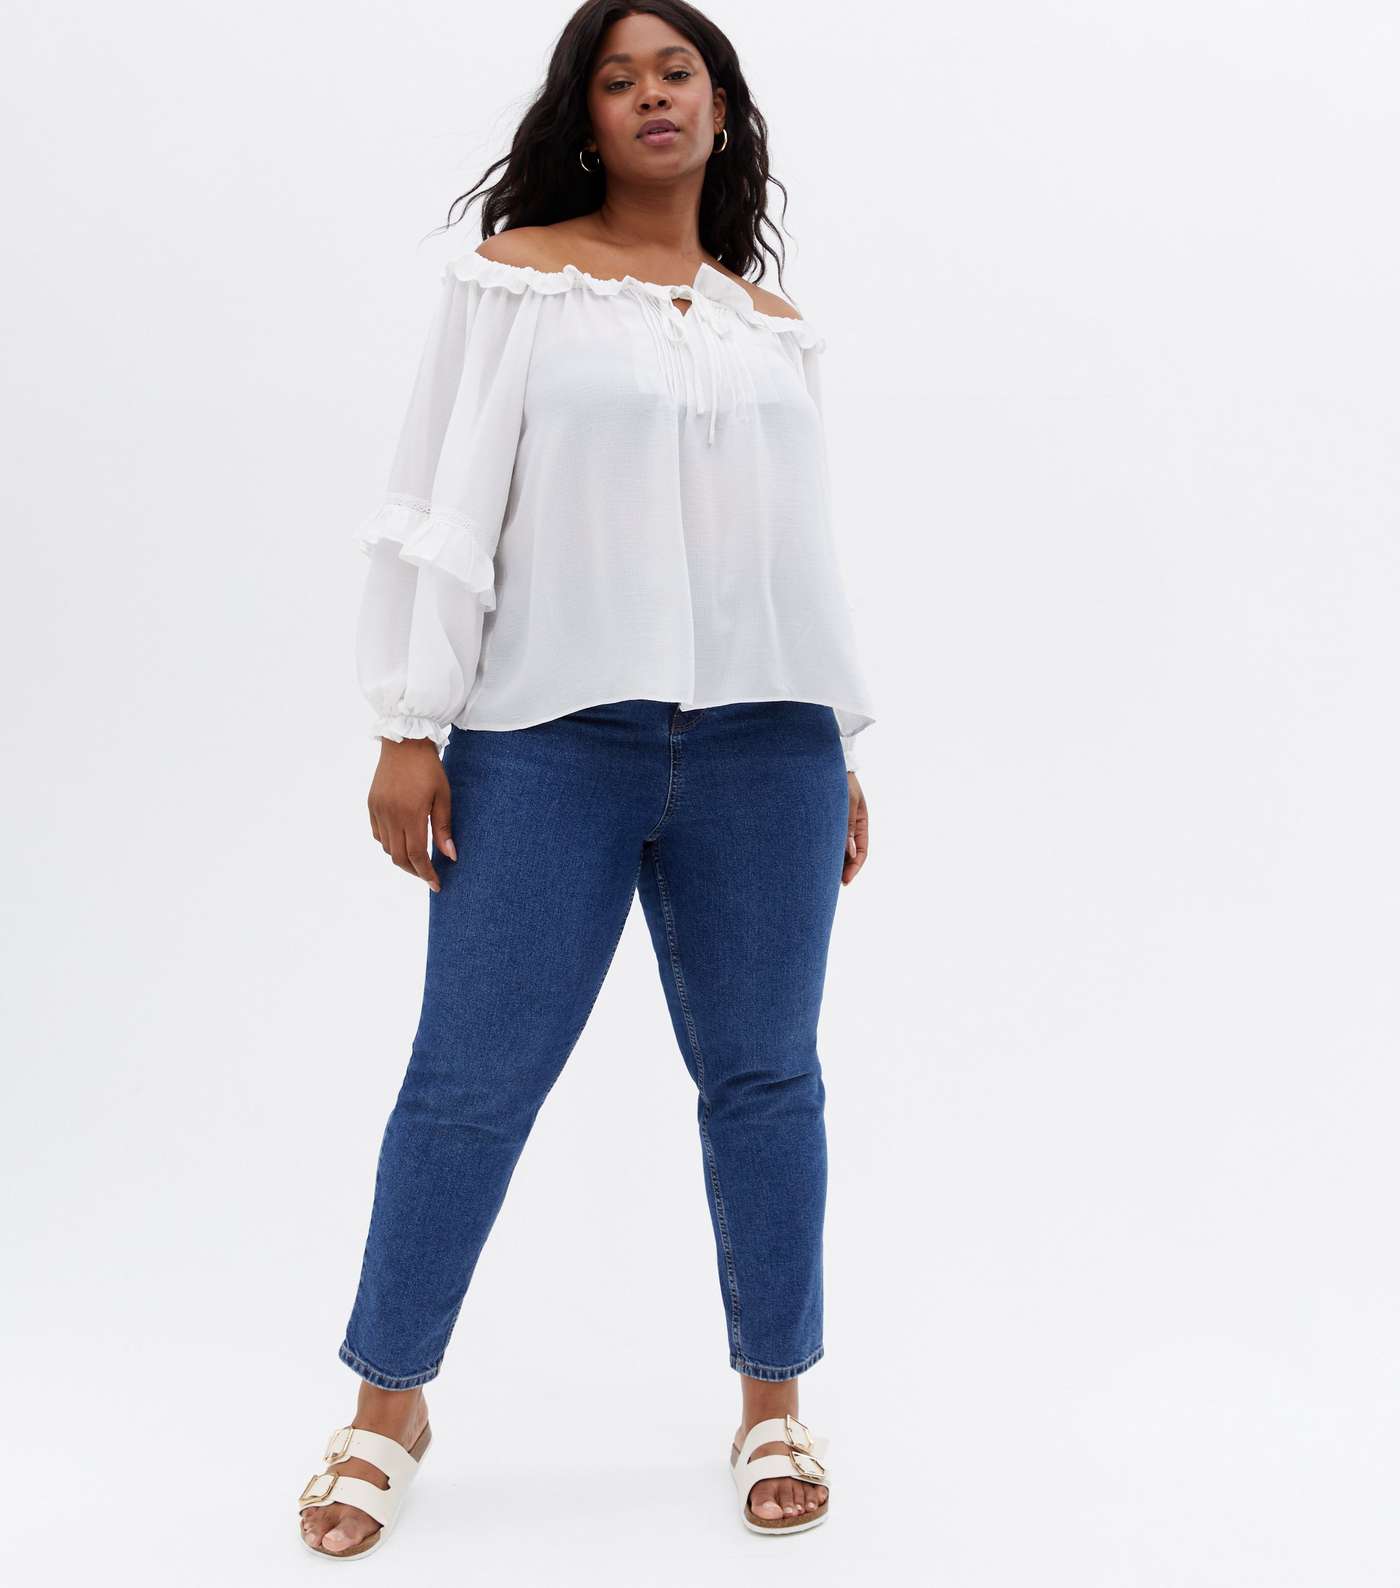 Curves Off White Frill Tie Front Bardot Blouse Image 2